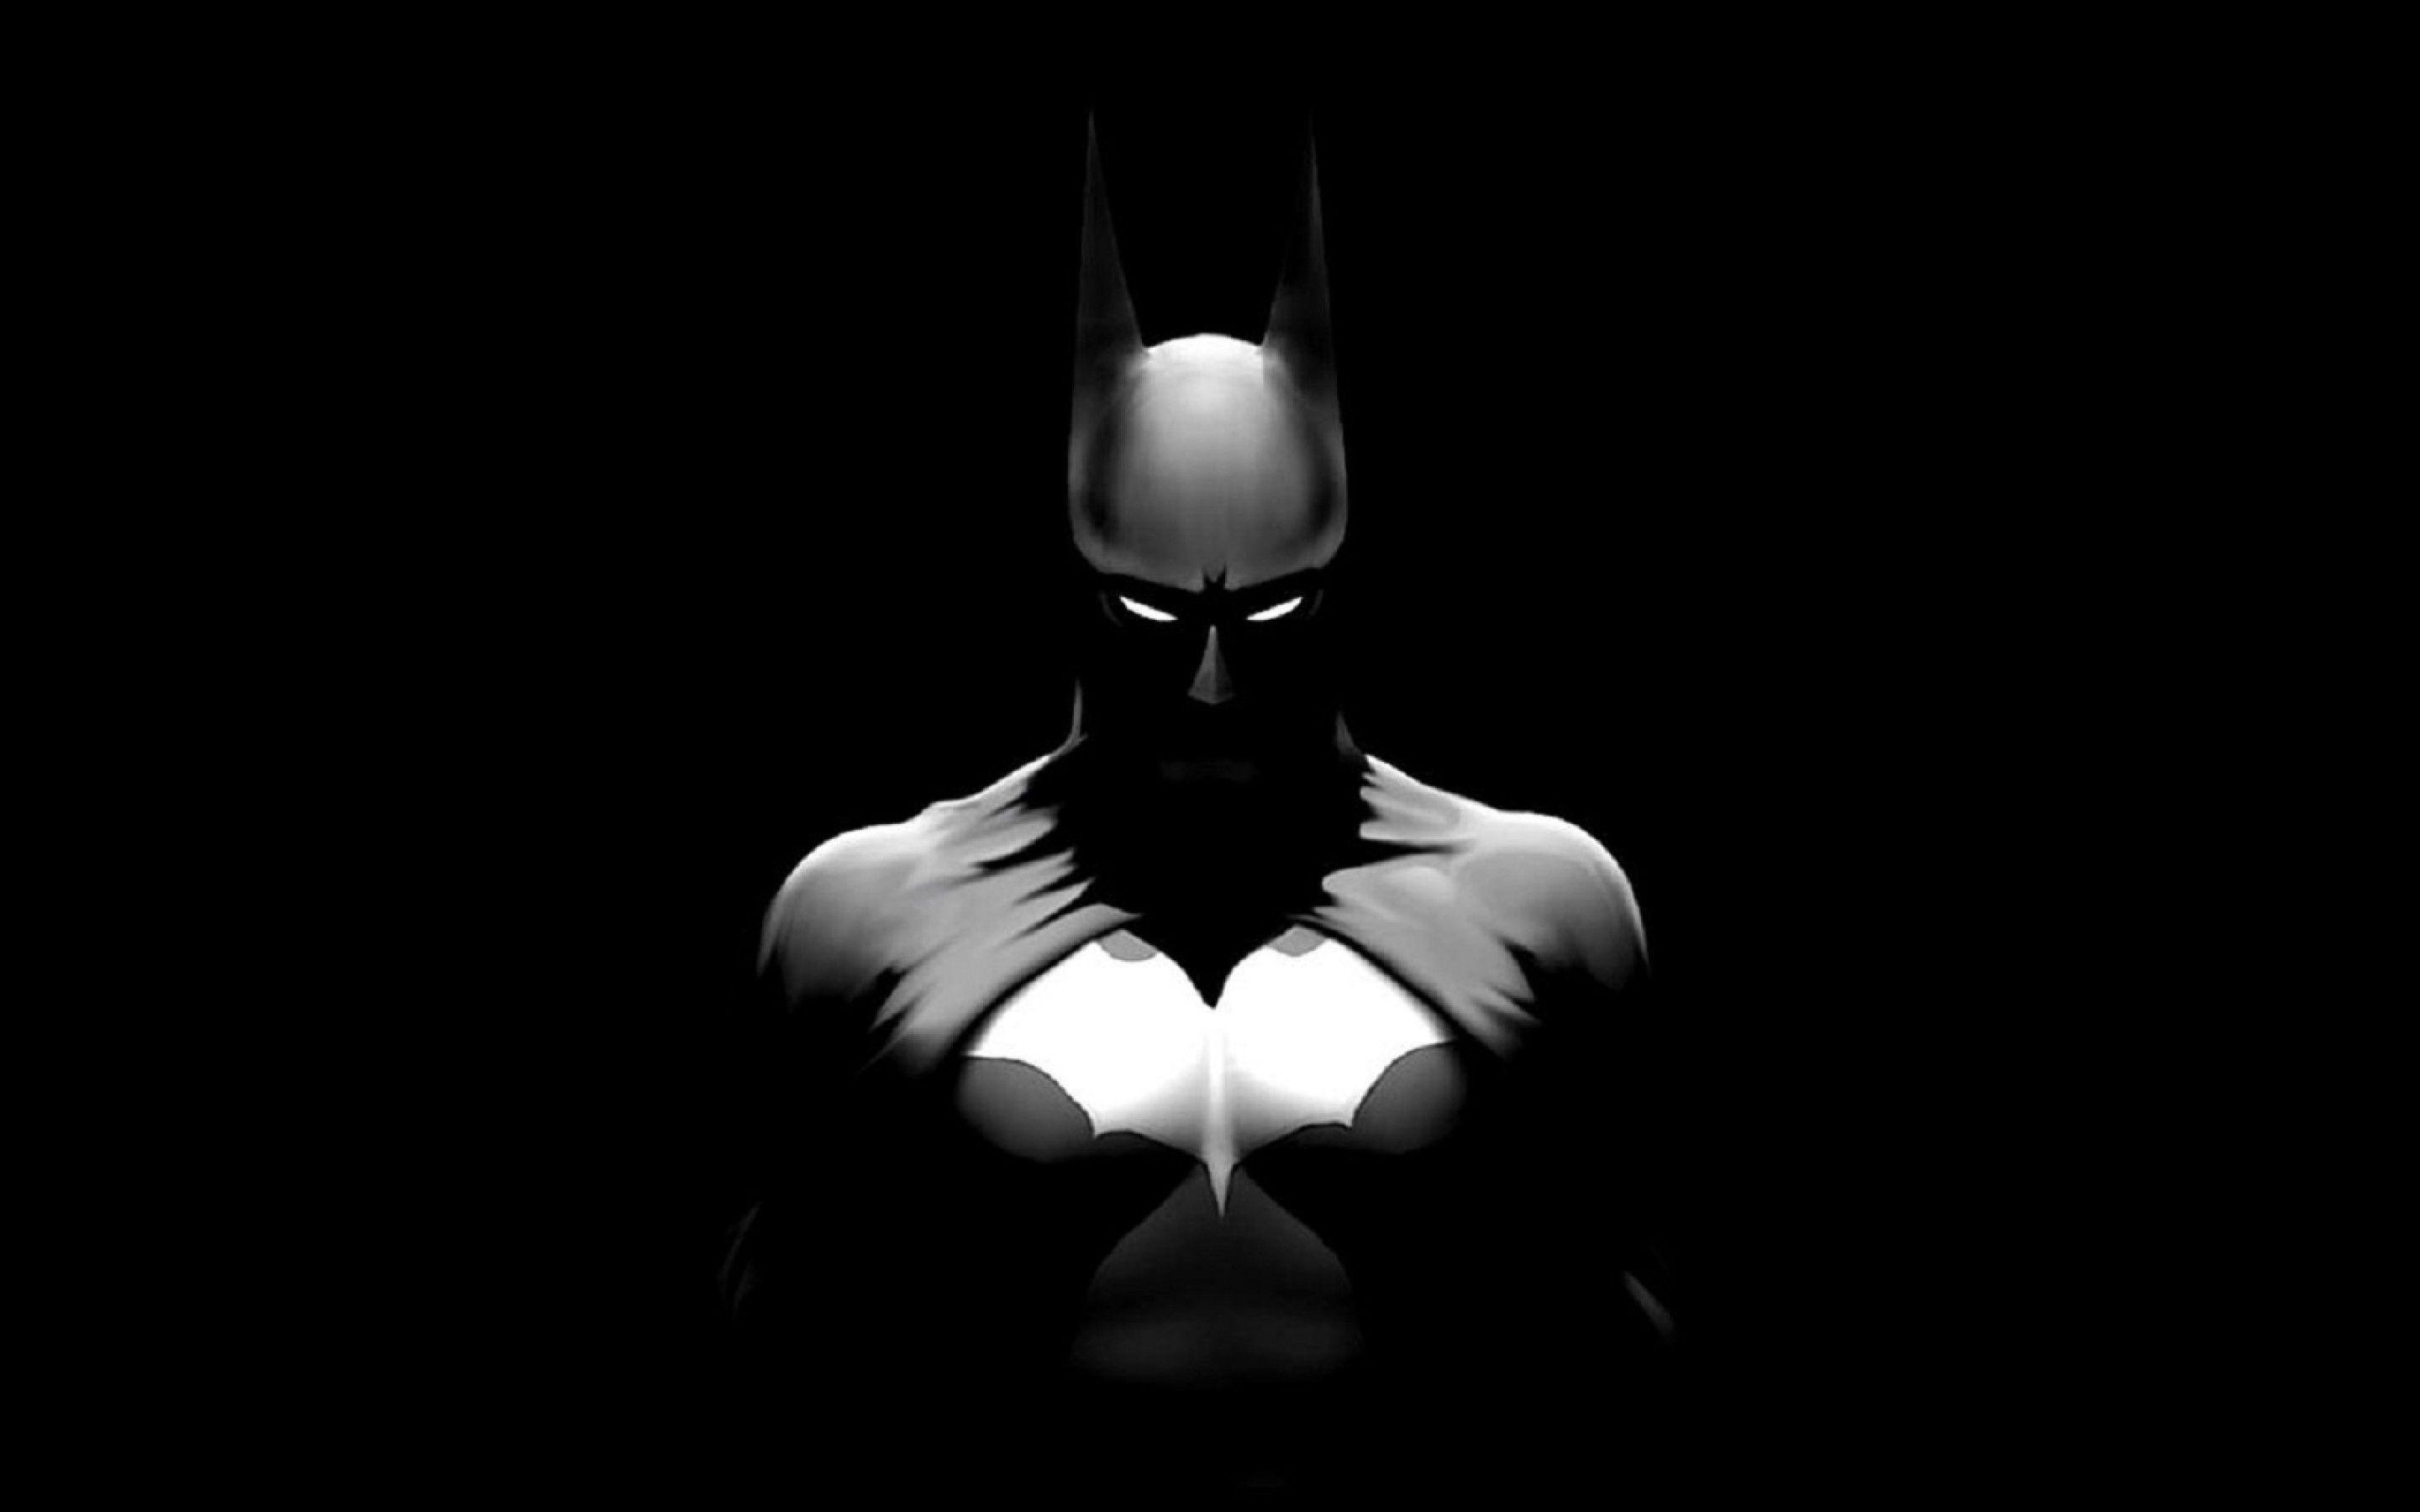 Batman Black and White Wallpapers - Top Free Batman Black and White